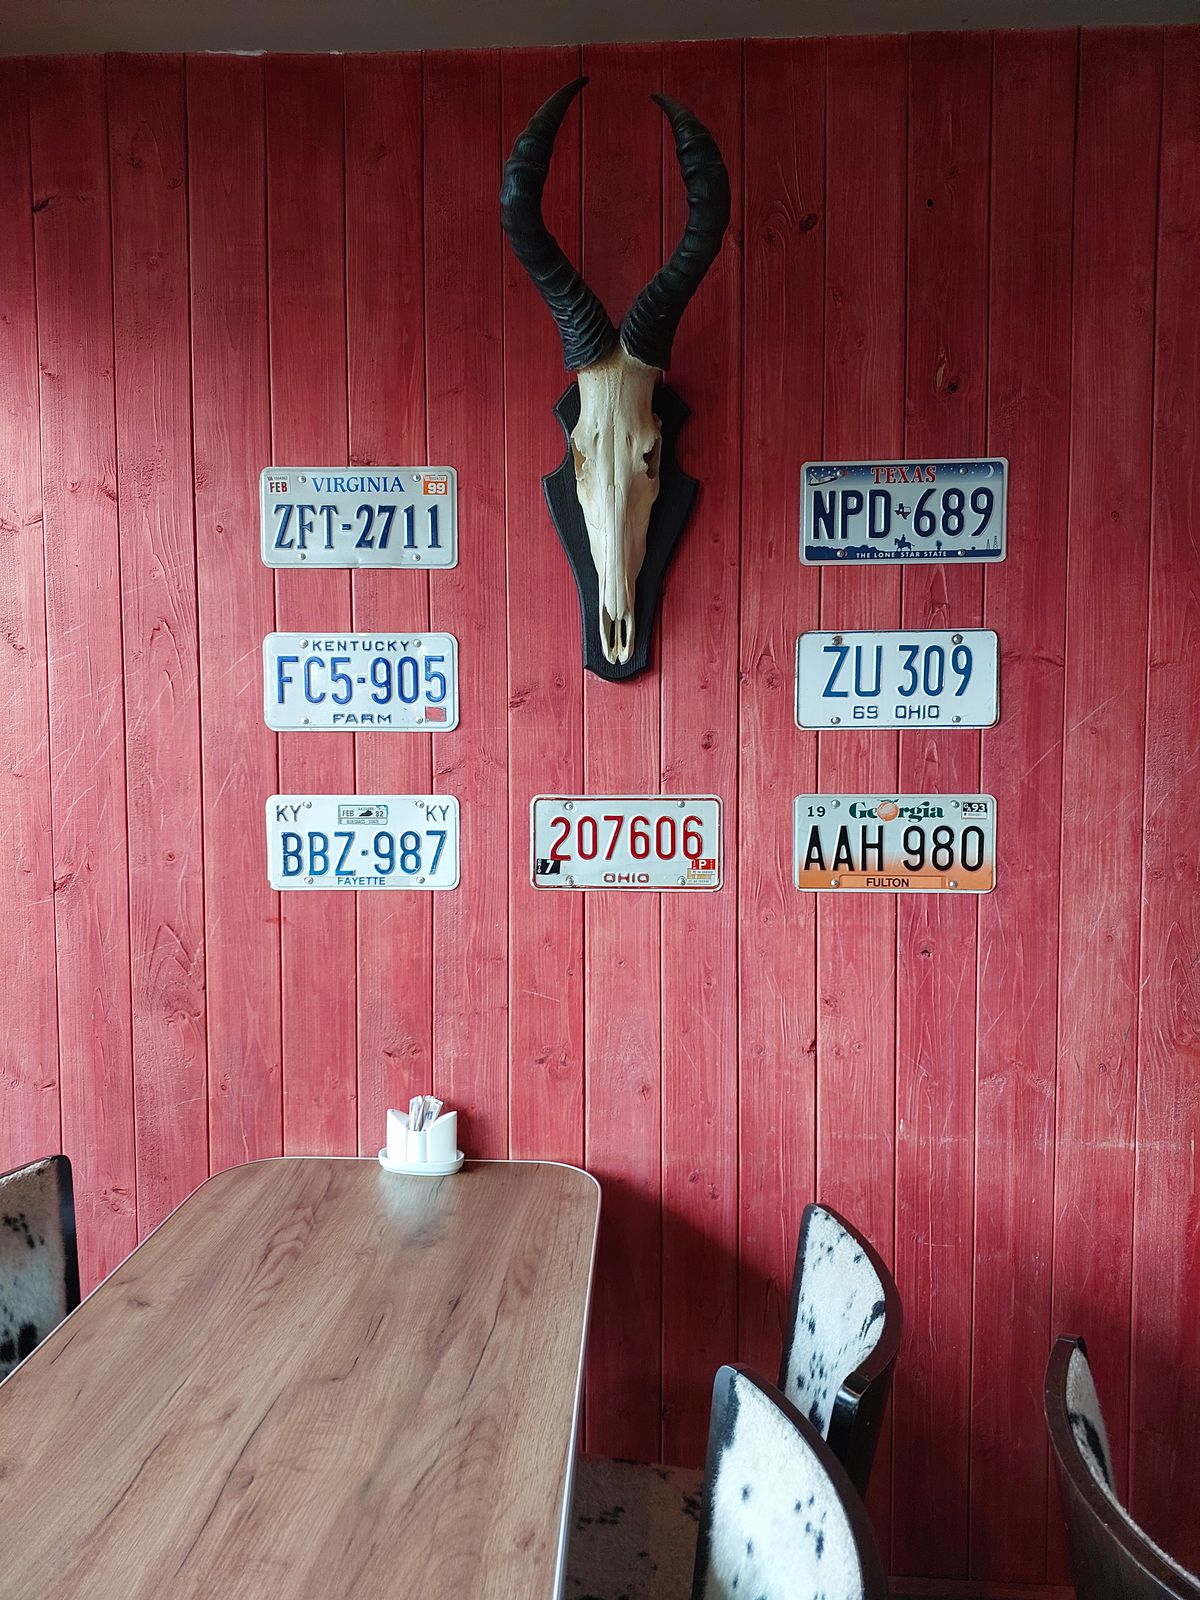 An animal skull hangs among American license plates on a red wood wall.